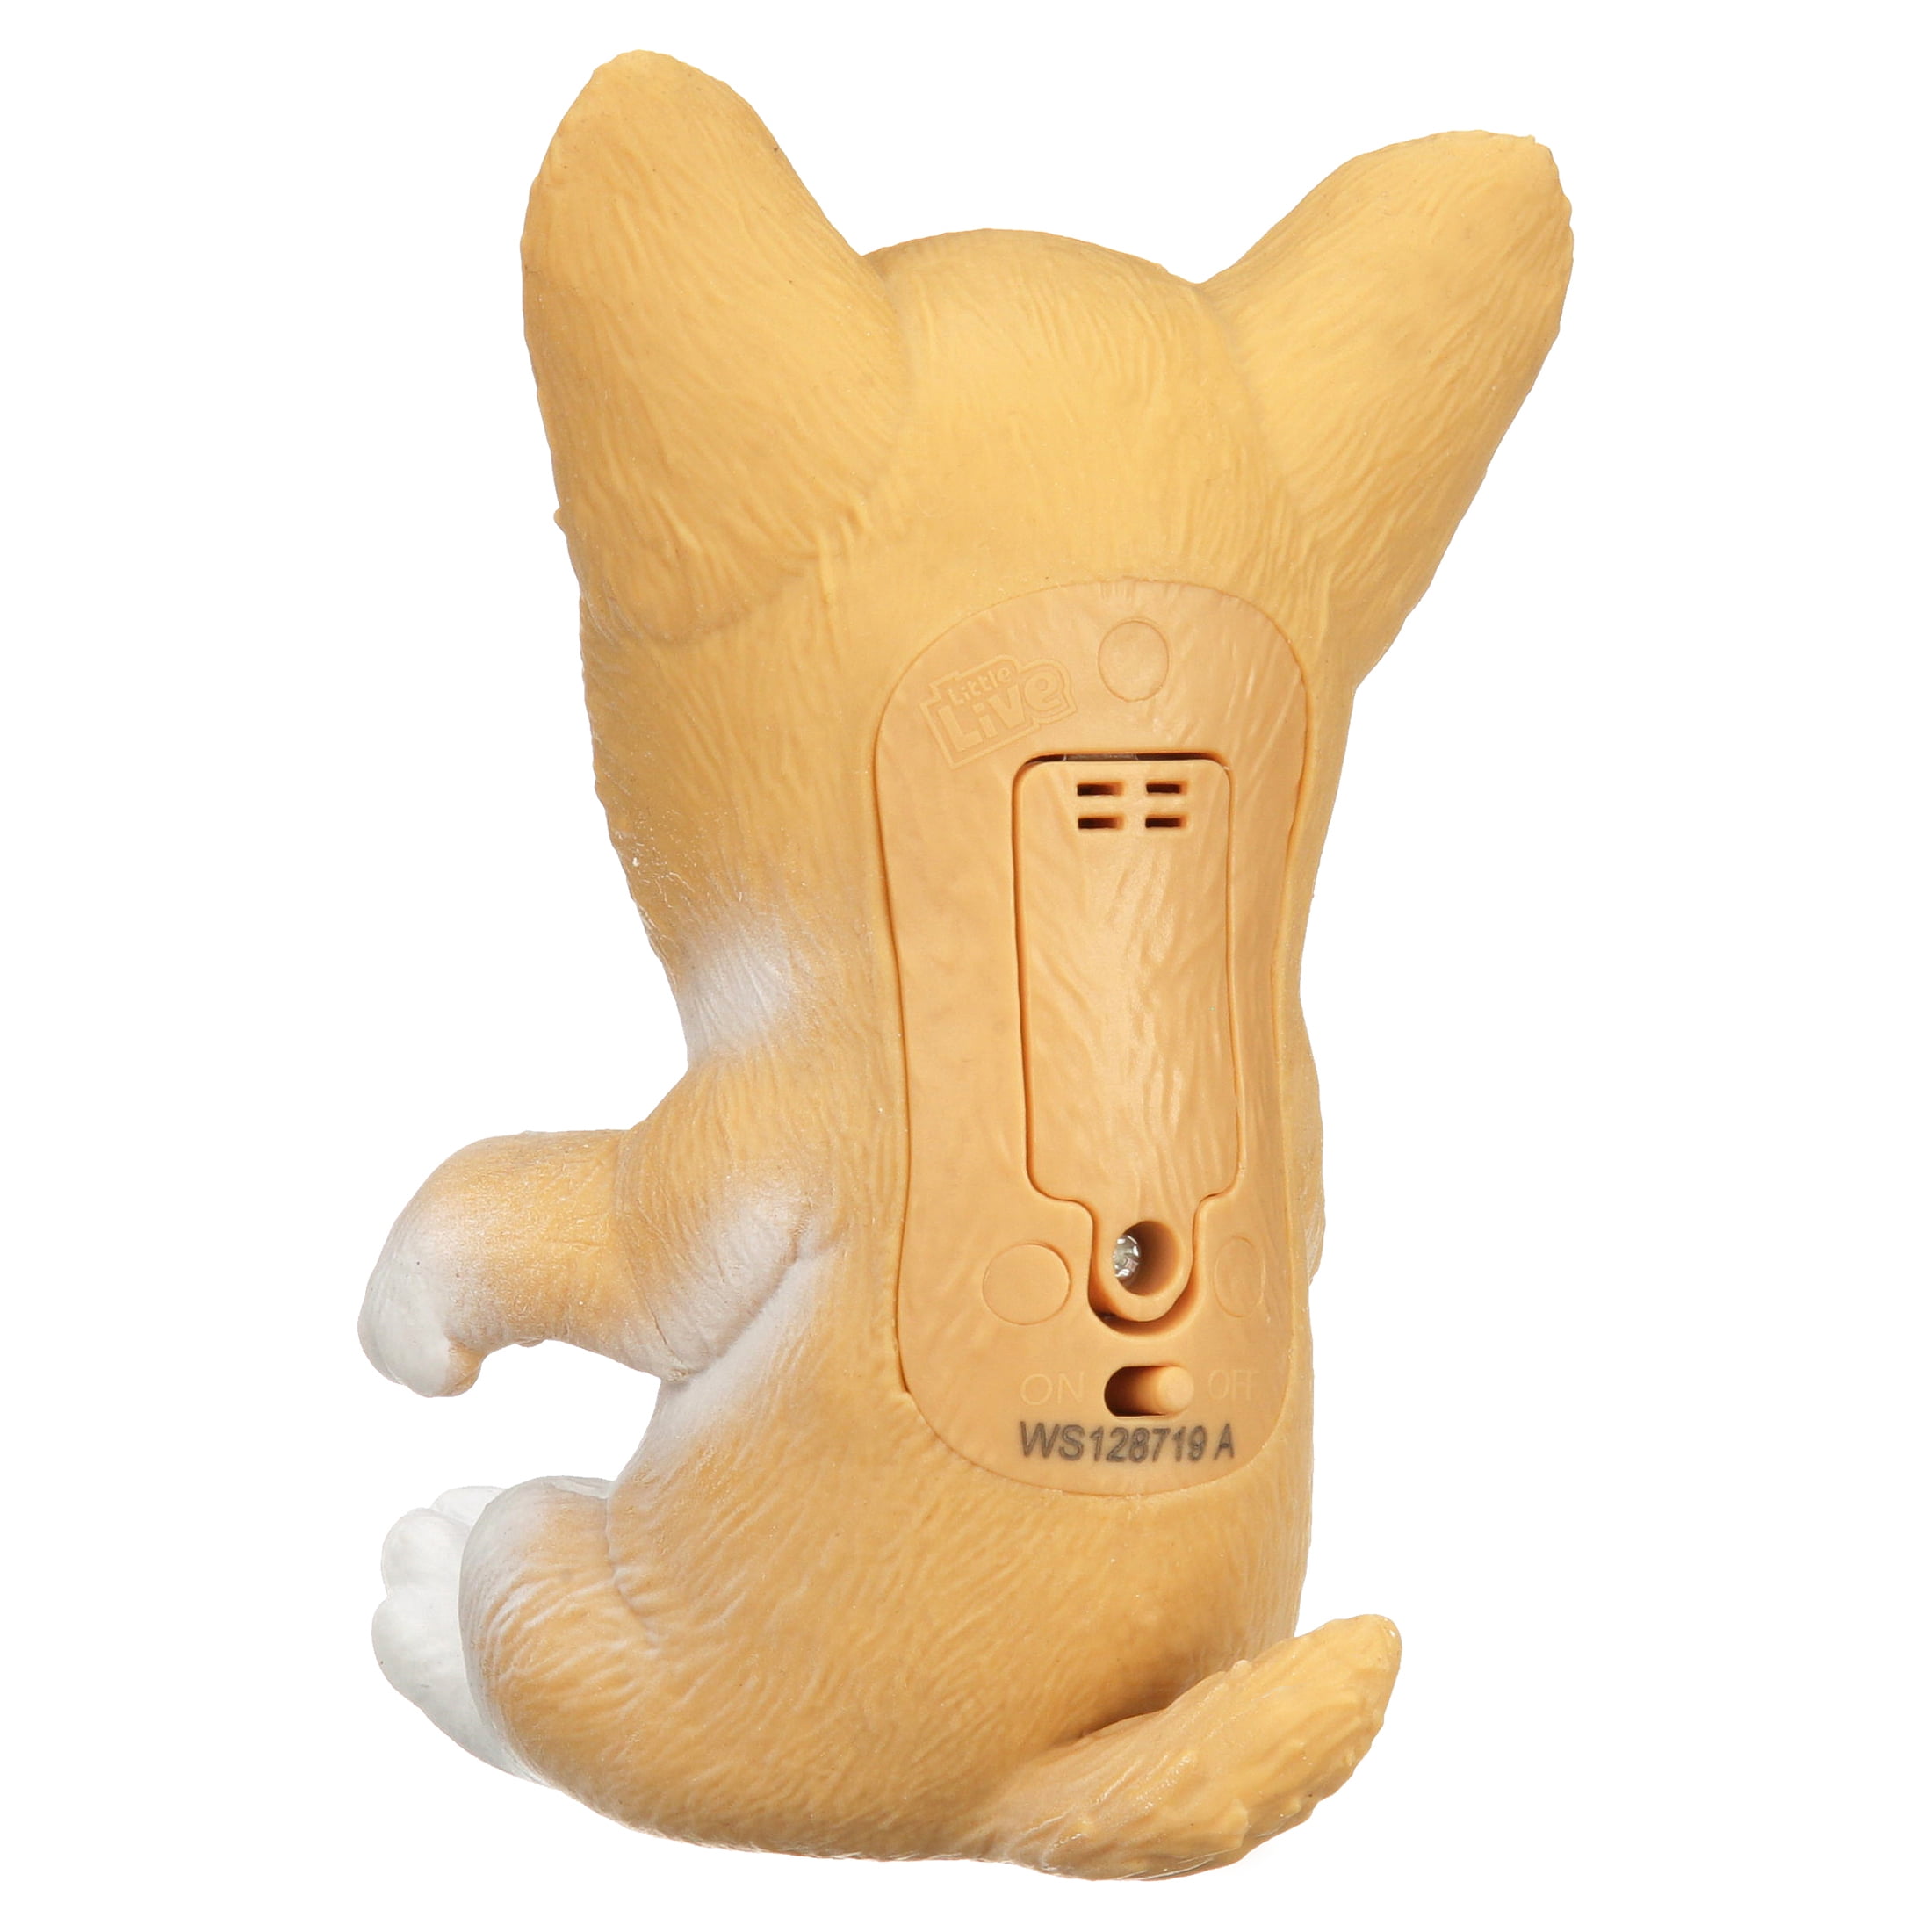 OMG Little Live Pets CORGI Soft Squishy Puppy Dog Interactive with Bottle NEW 